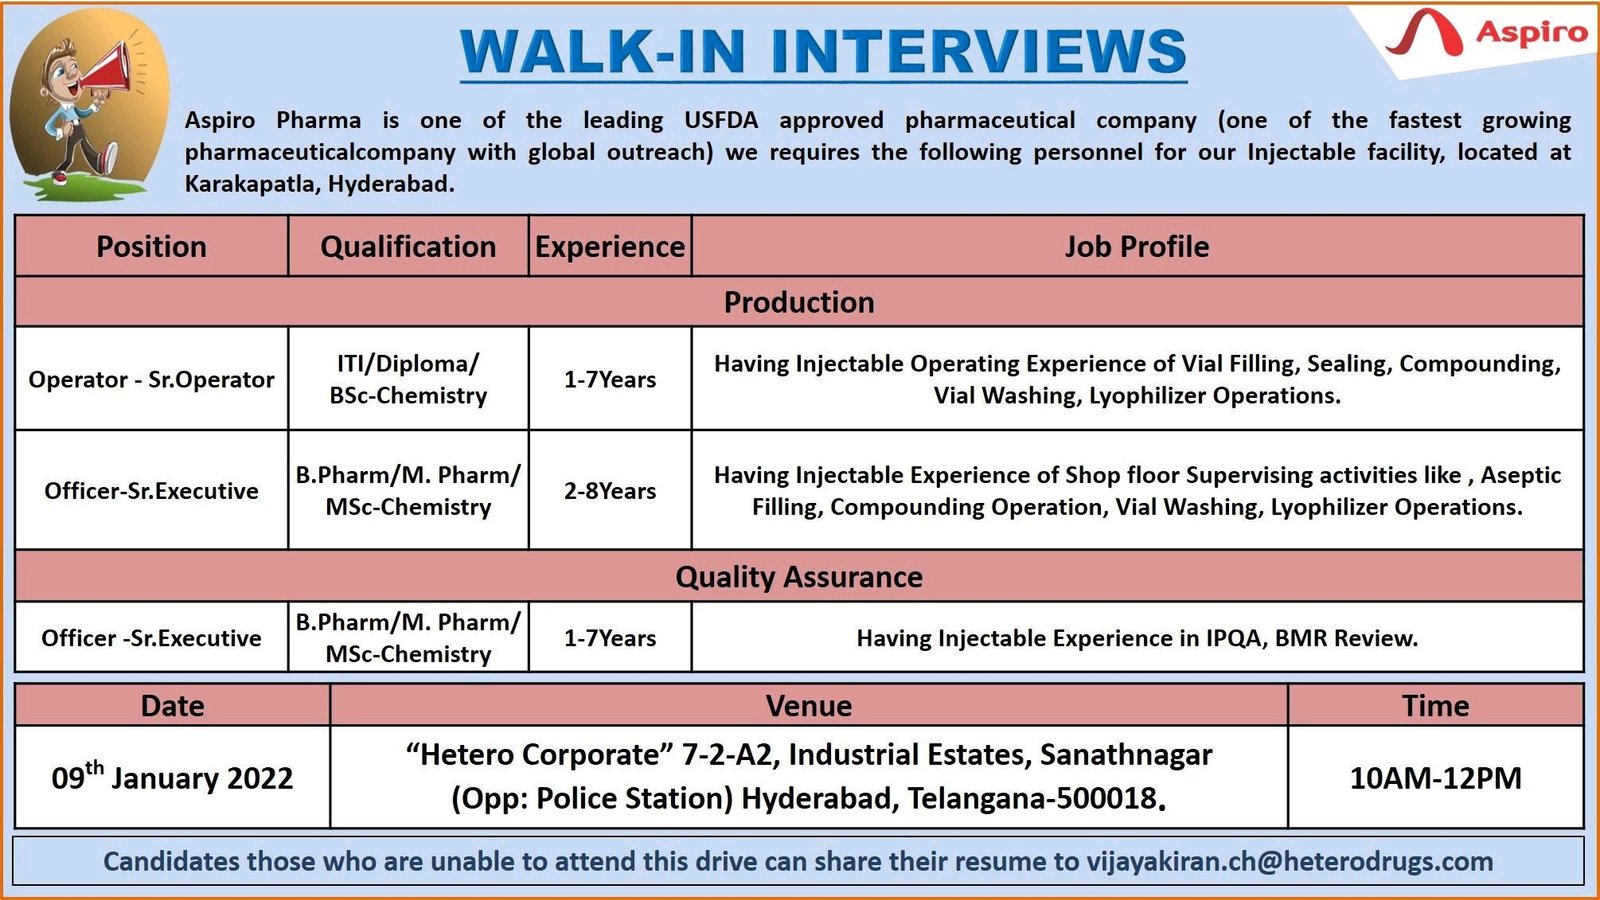 Aspiro Pharma walk in interview in hyderabad for QC, Production Departments